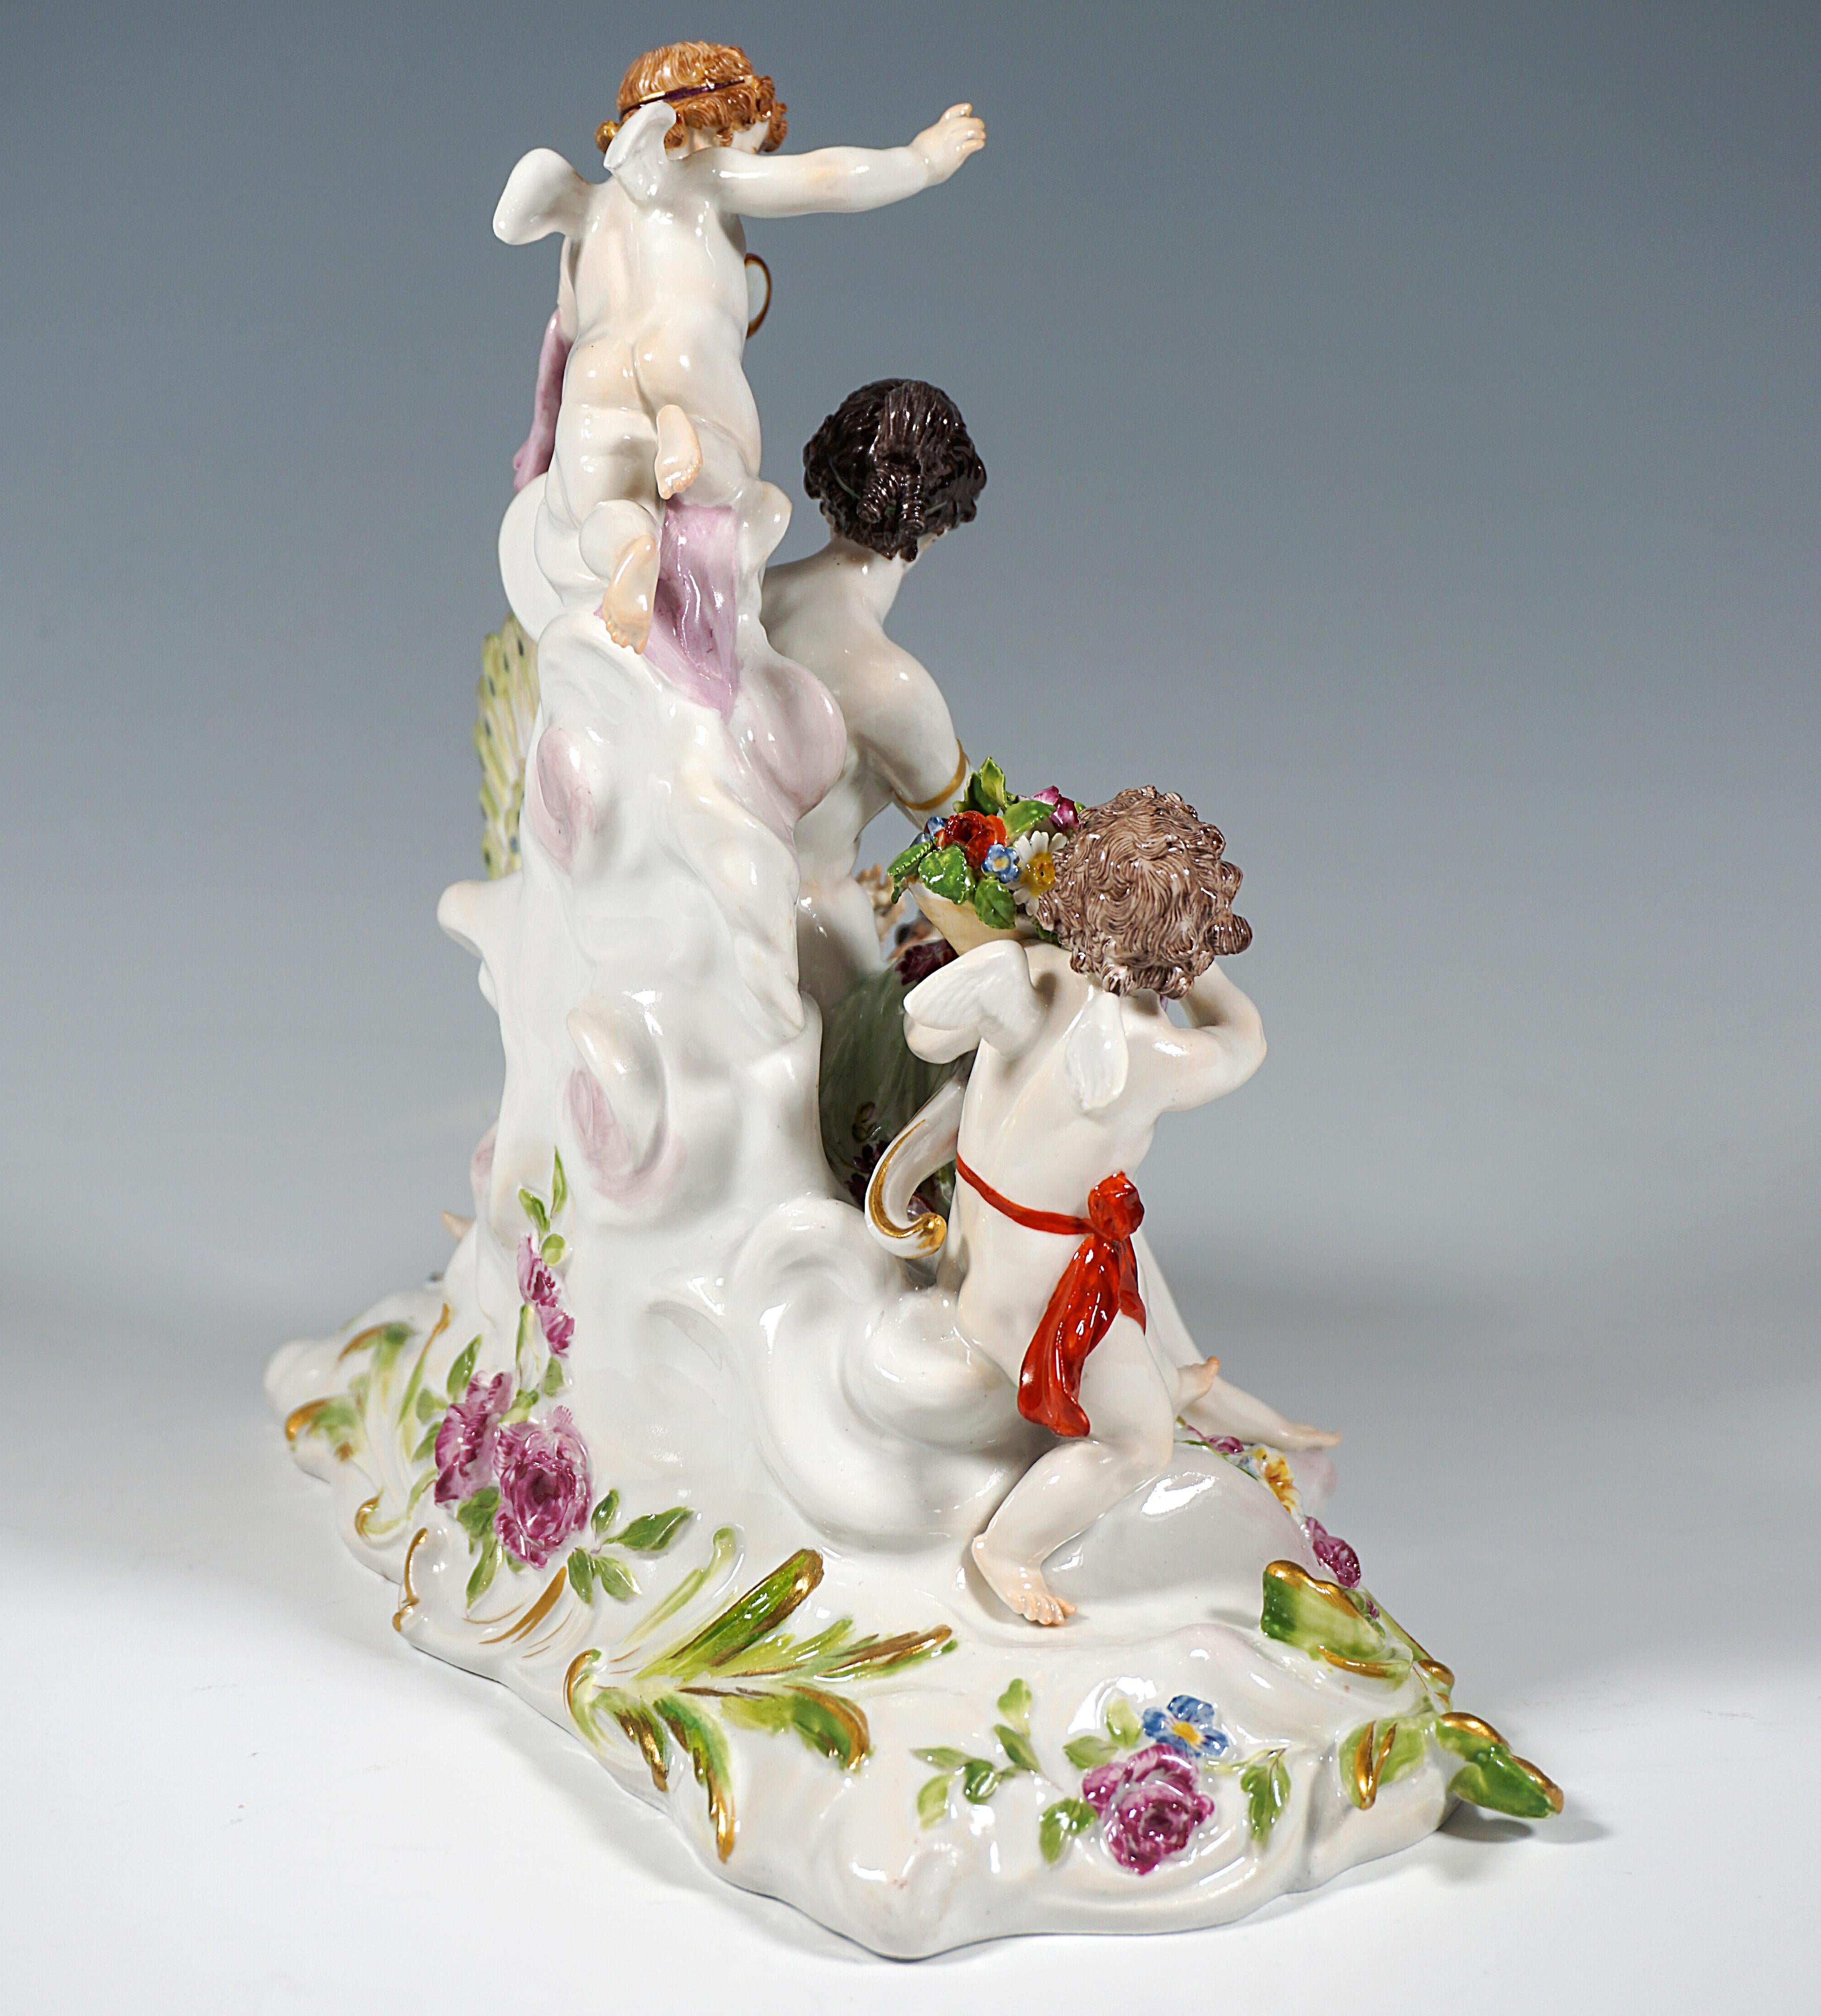 Hand-Crafted Meissen Art Nouveau Group 'the Air' by Paul Helmig, Germany, Around 1900 For Sale